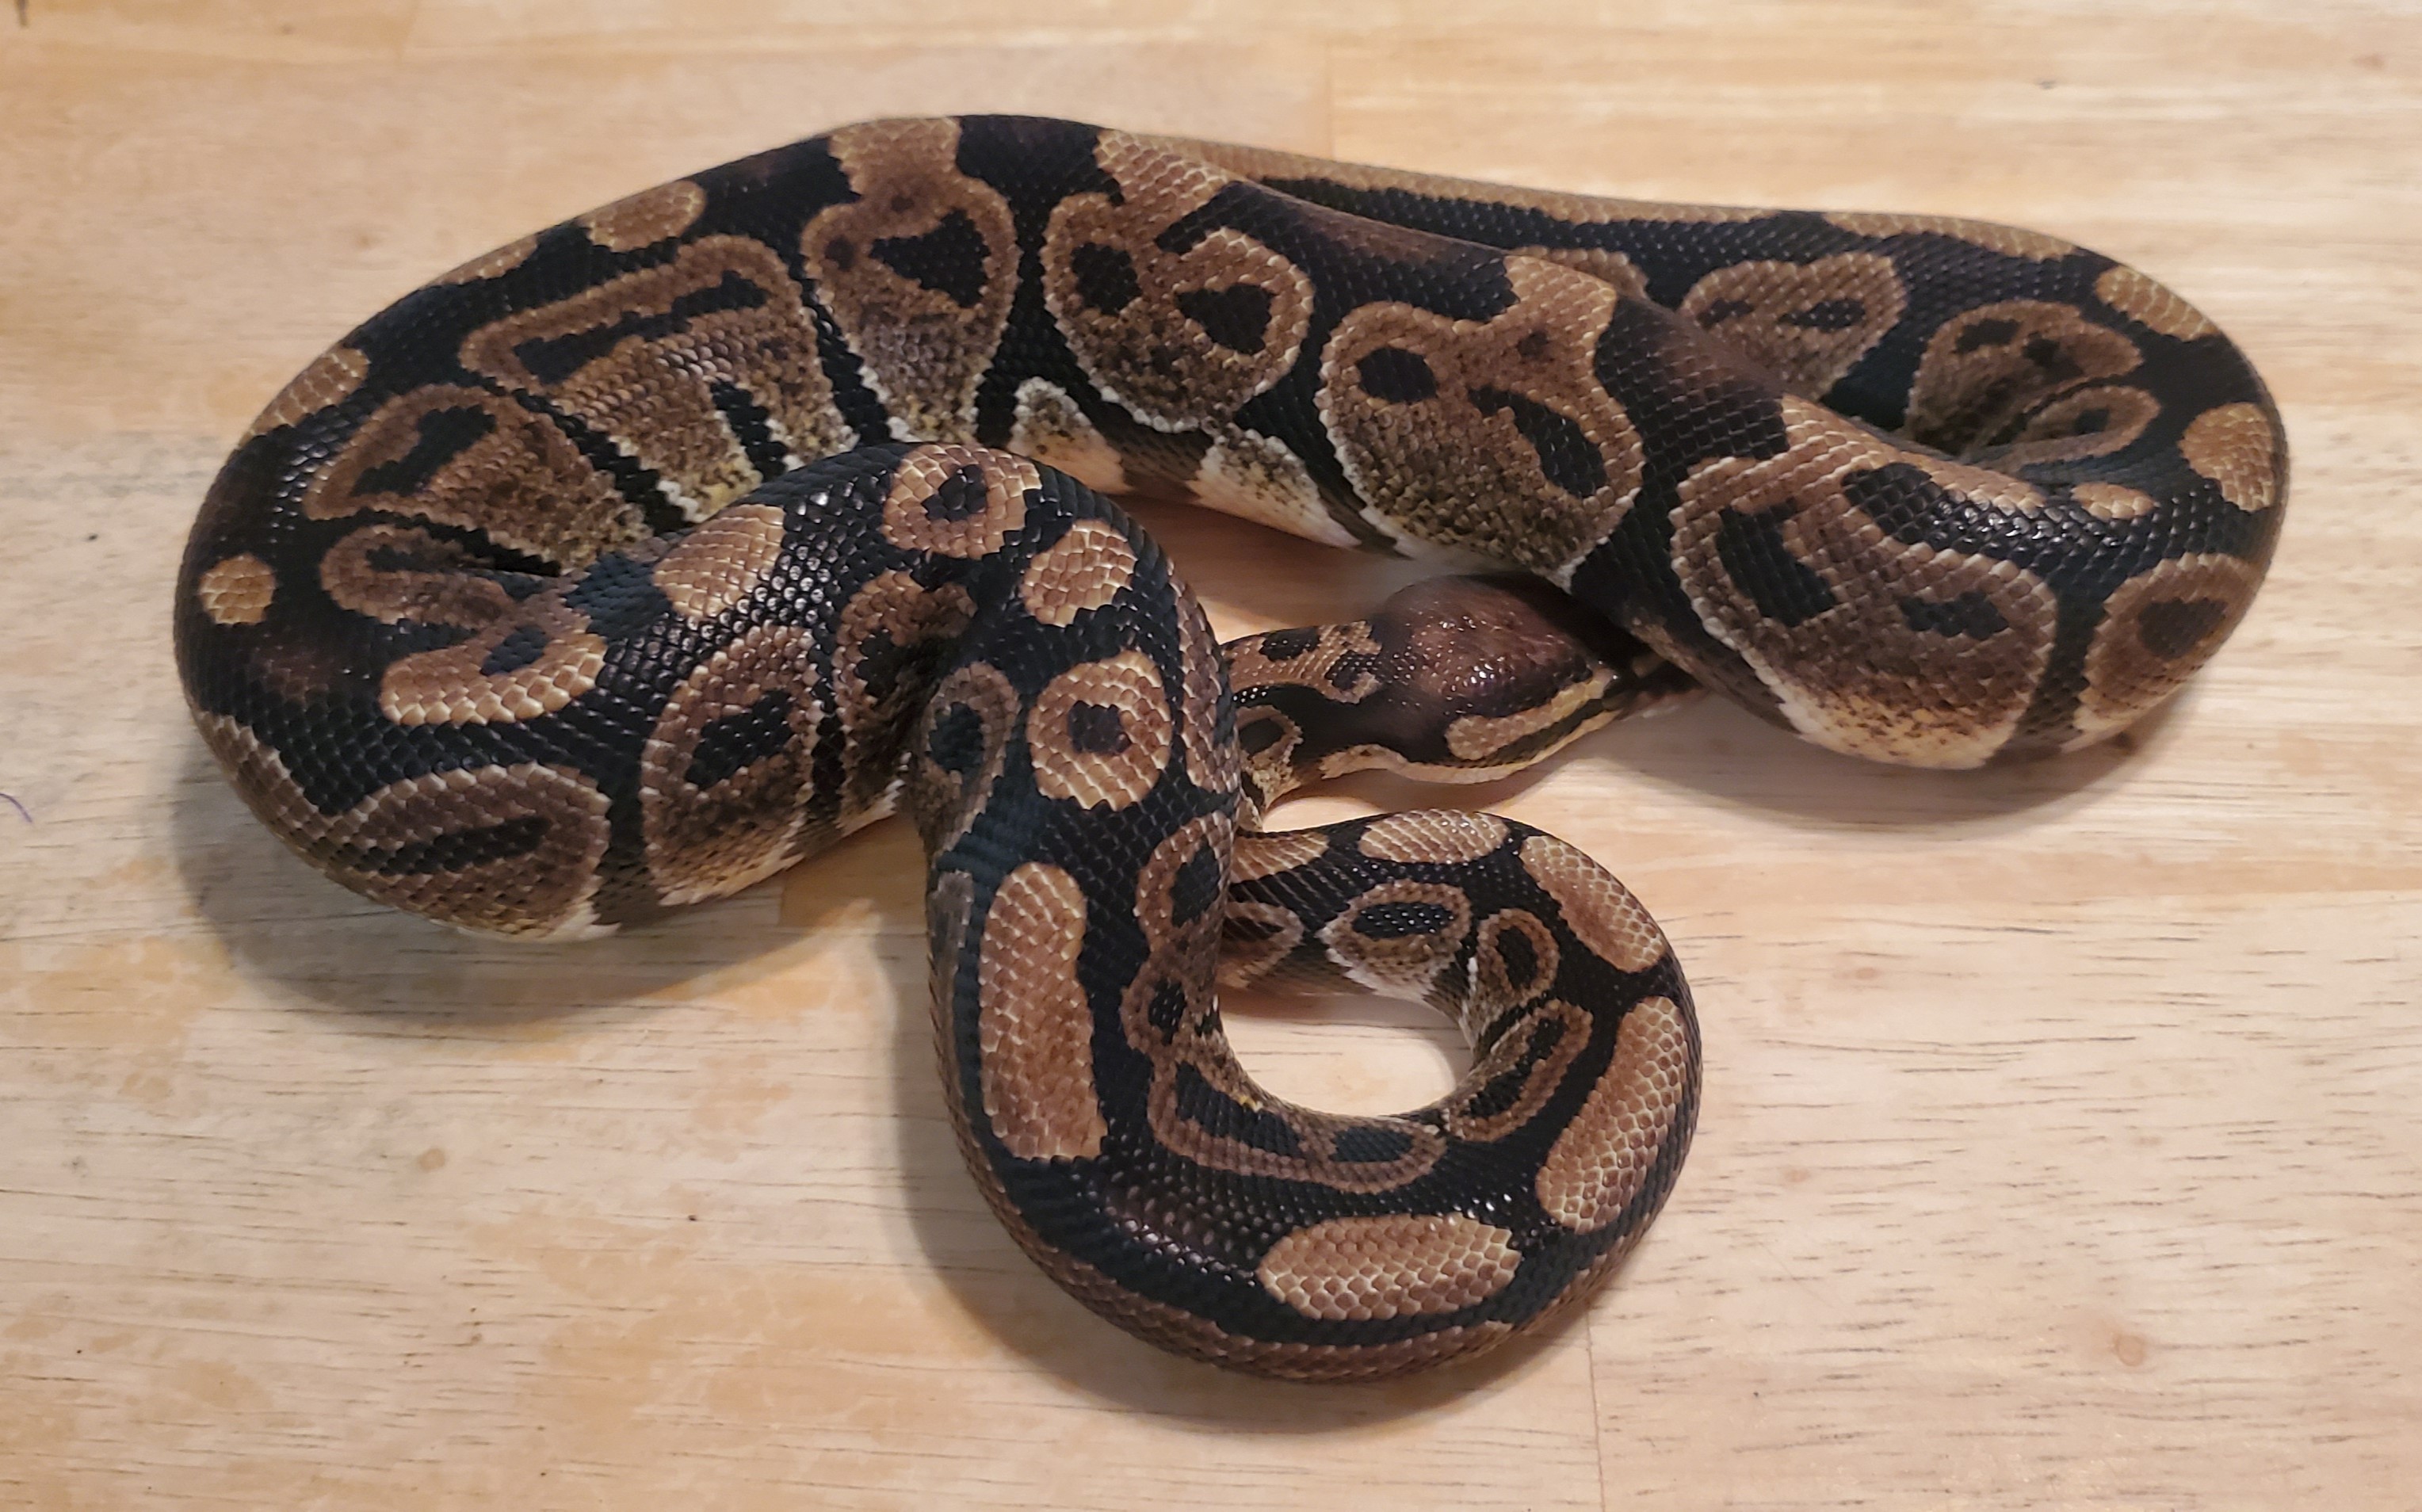 Marvel Ball Python by Serpent Serenity Reptiles and Ratterie